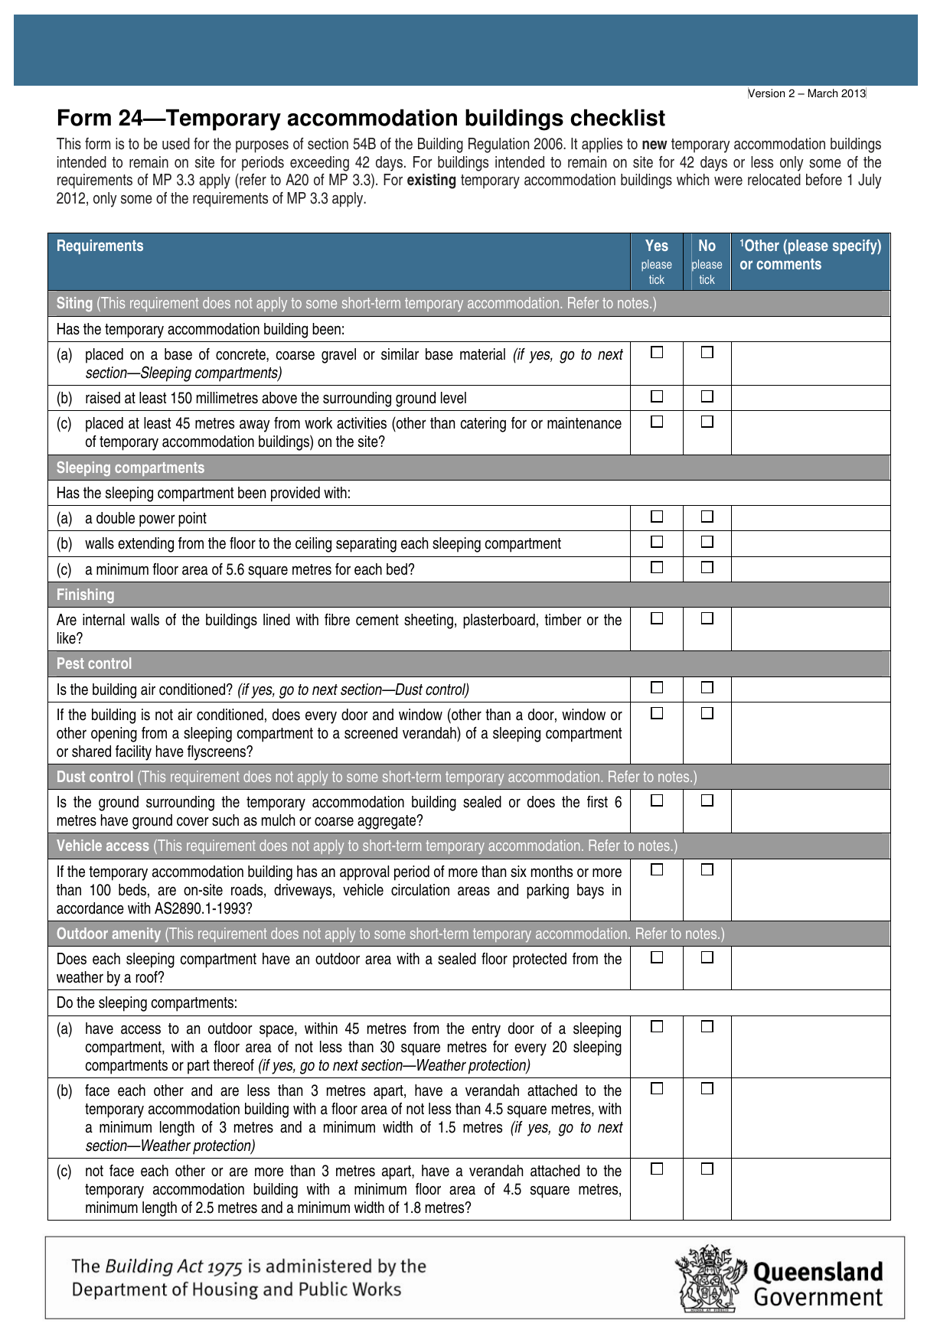 Form 24 Temporary Accommodation Buildings Checklist - Queensland, Australia, Page 1